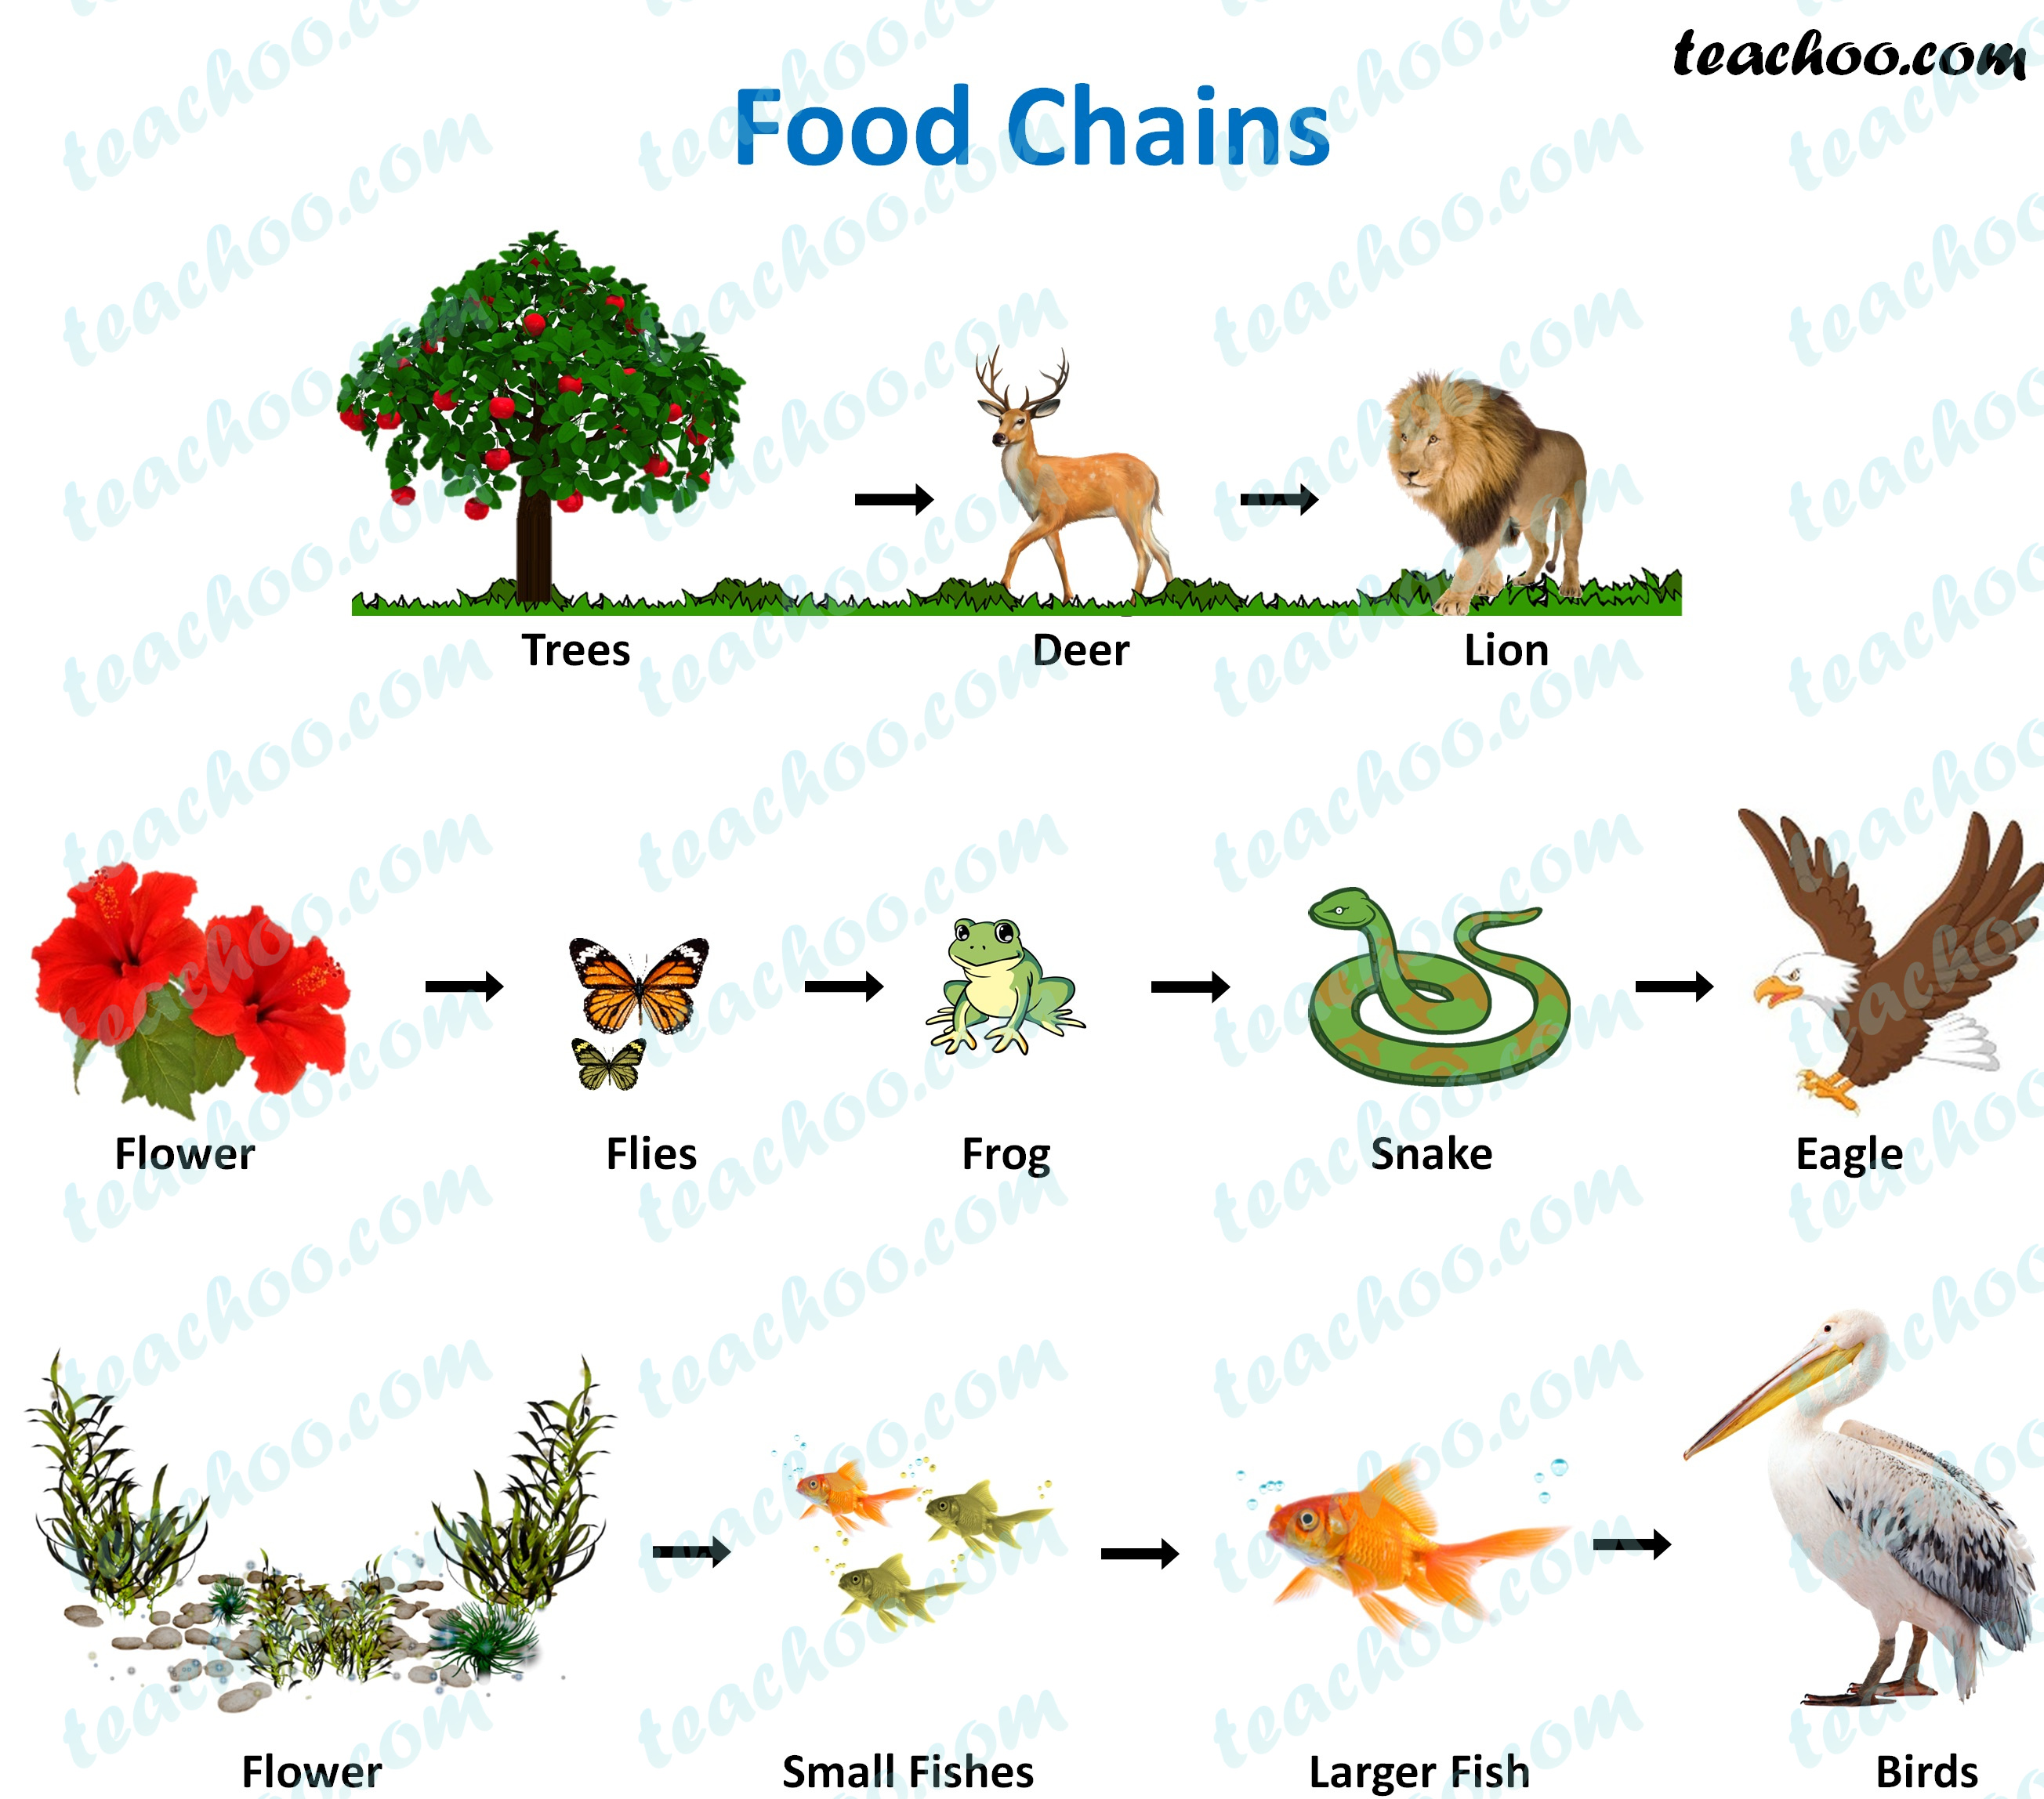 Food Chain and Food Web - Meaning, Diagrams, Examples - Teachoo